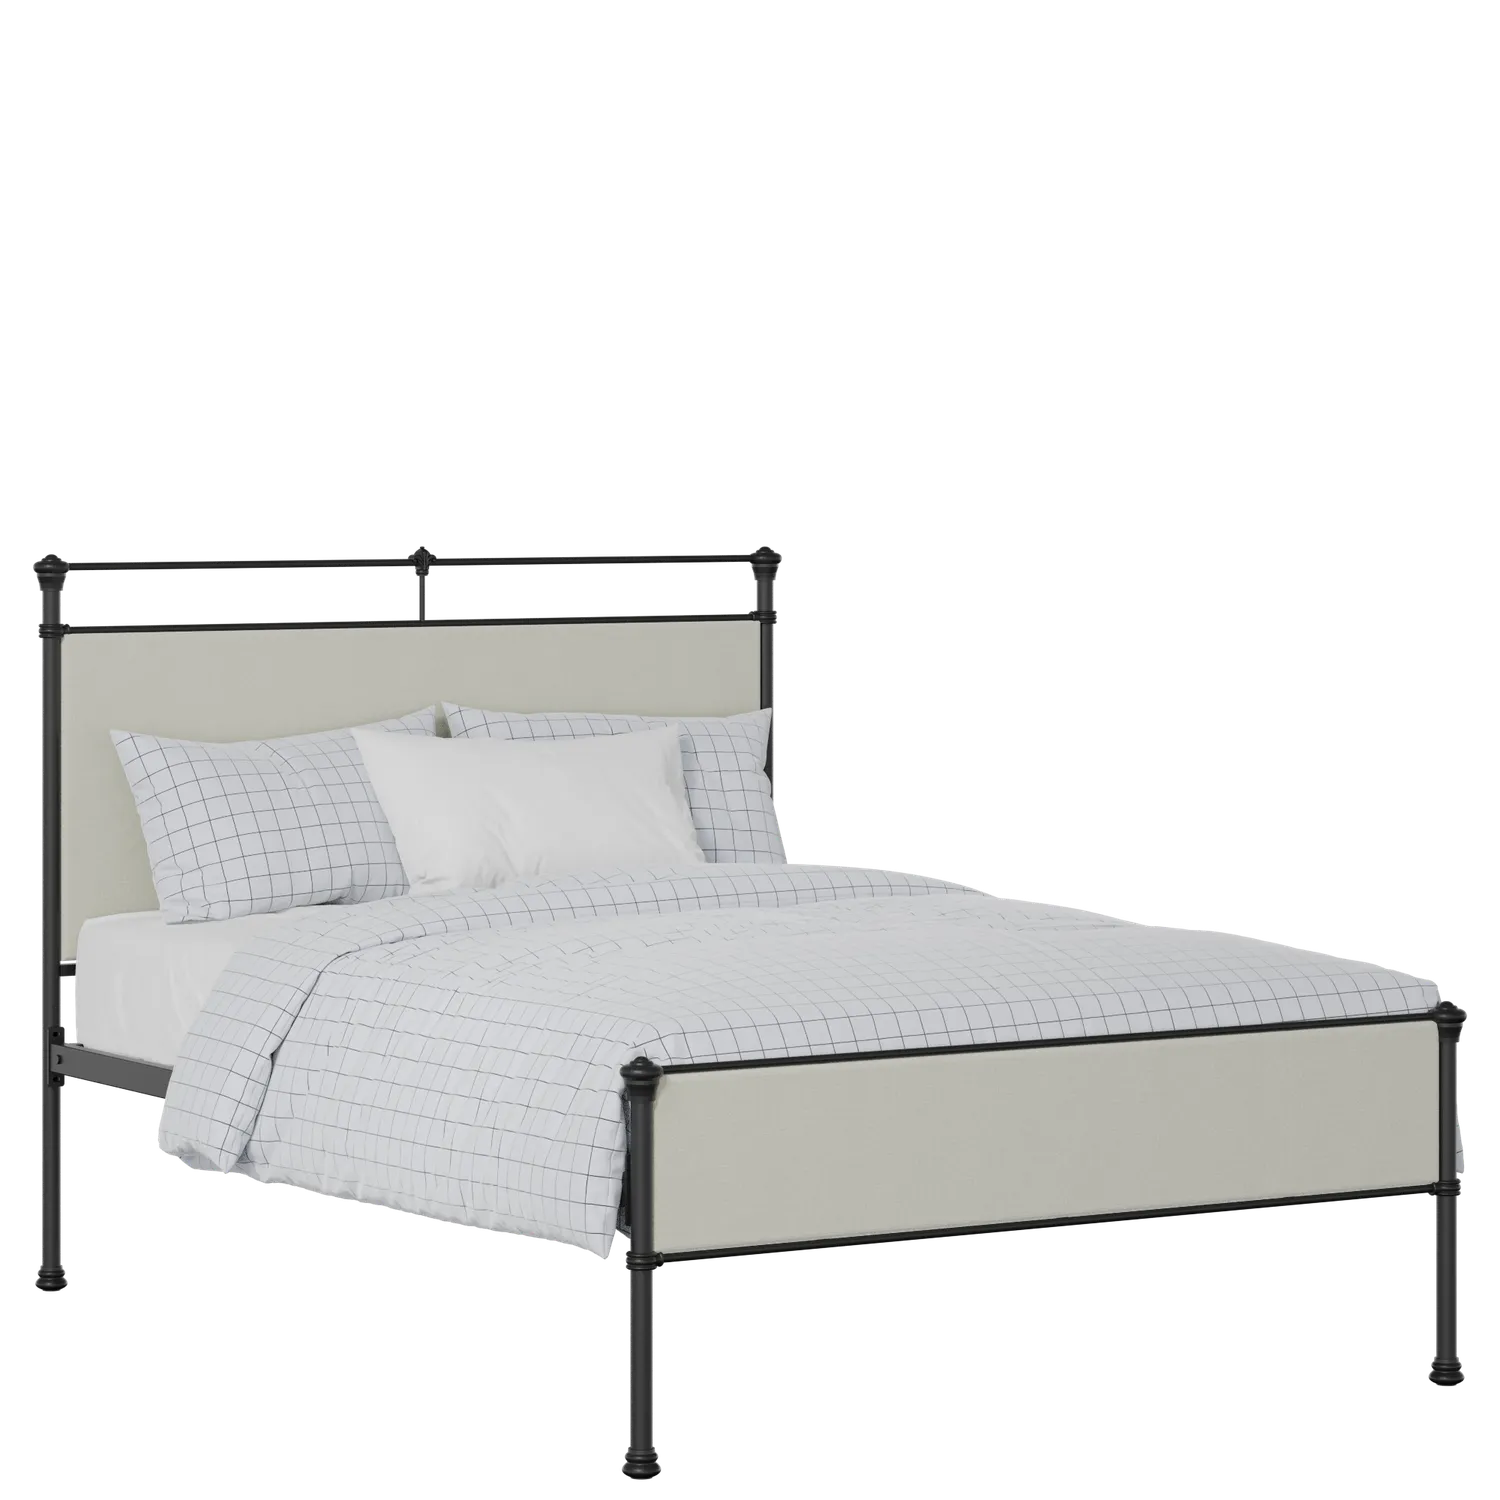 Nancy Slim iron/metal upholstered bed in black with oatmeal fabric